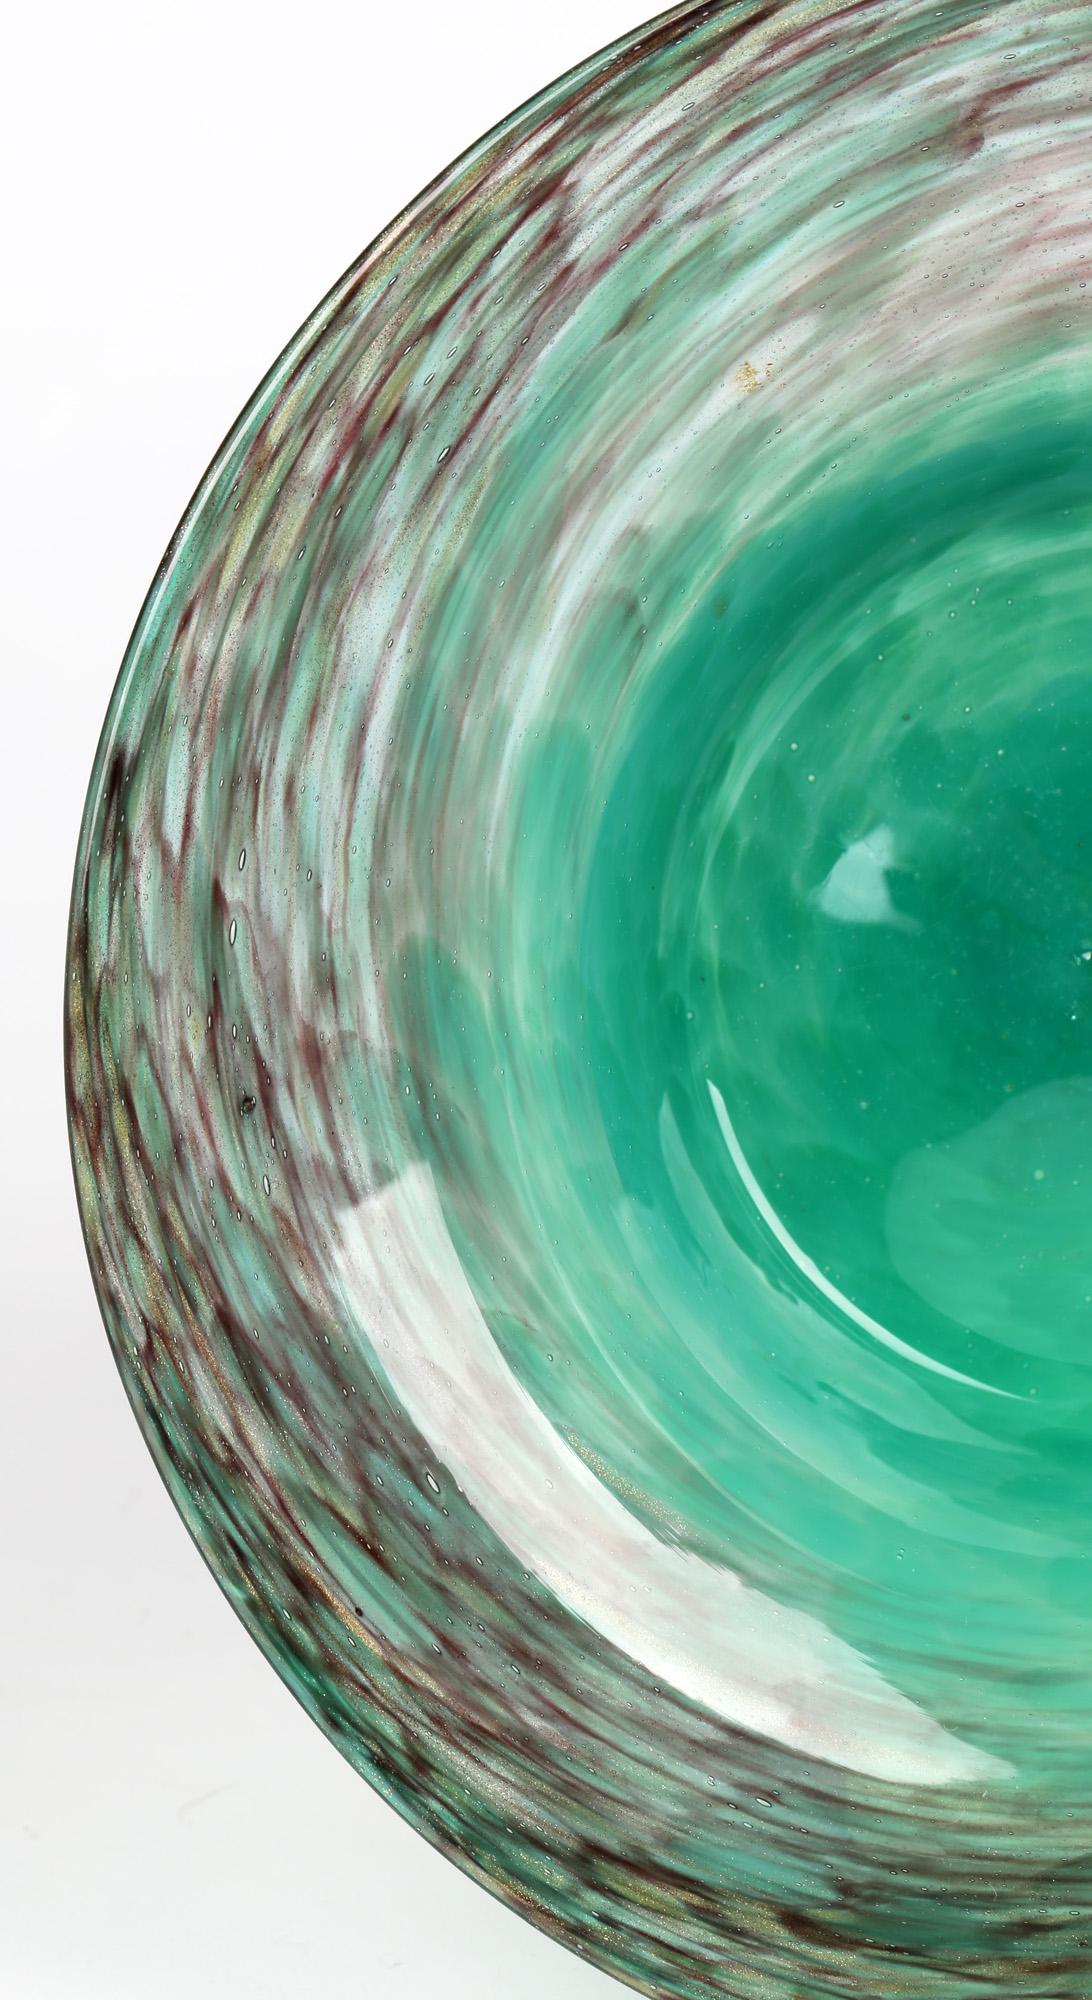 A good quality Scottish Art Deco glass bowl with bright turquoise and gold aventurine swirl patterning by Monart. The rounded art glass bowl has a recessed centre with a wide rim and has a bright mottled turquoise glass centre with a swirling